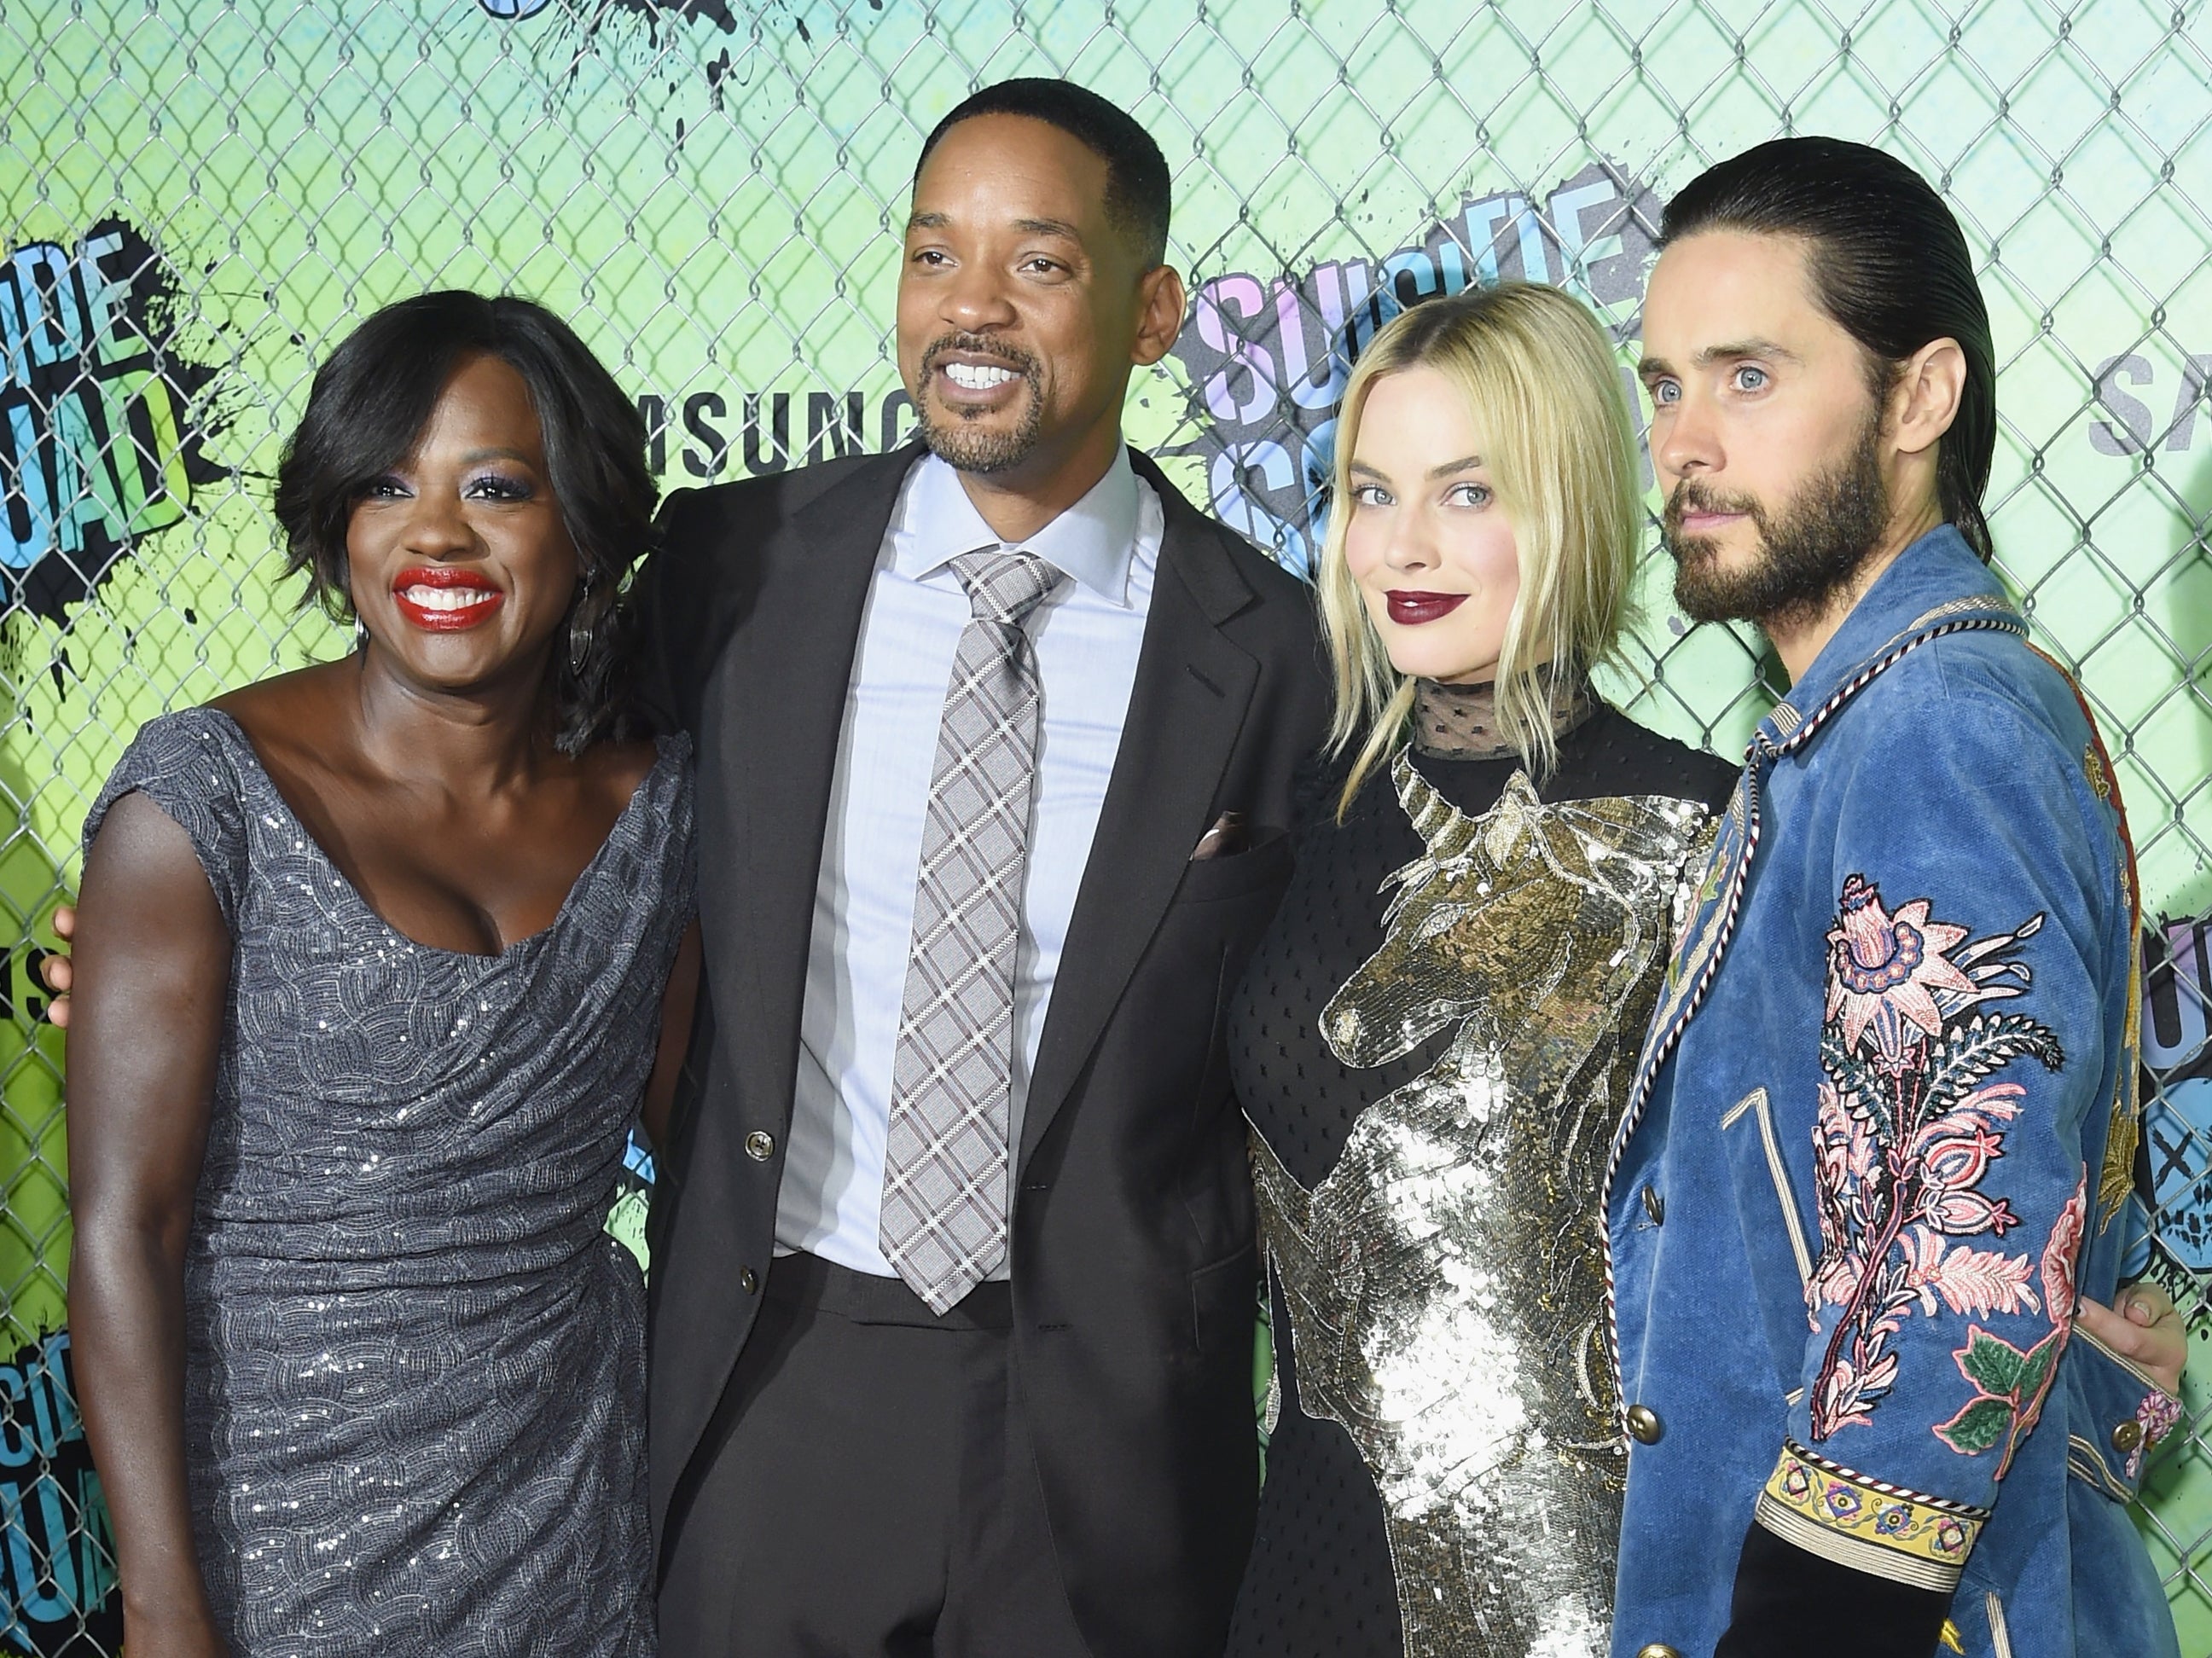 Viola Davis, Will Smith, Margot Robbie and Jared Leto at the premiere of ‘Suicide Squad’ in 2016